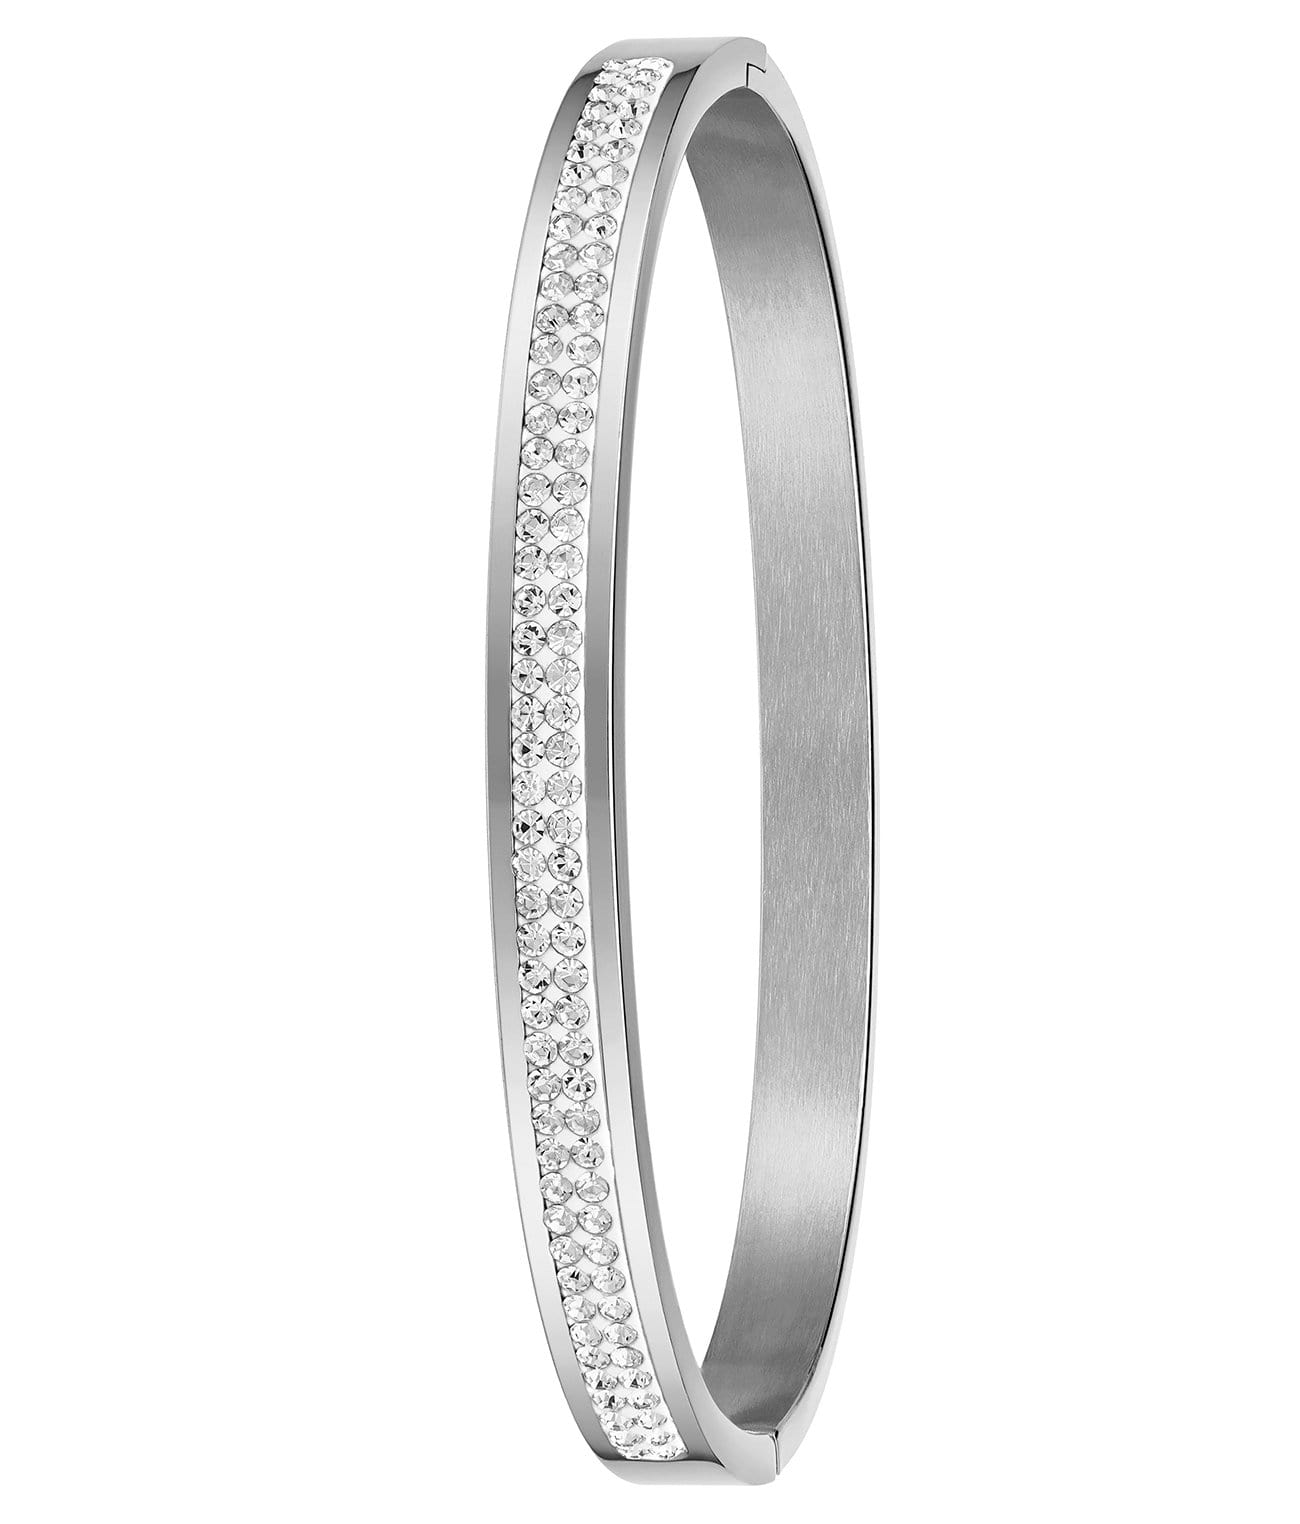 Lily 995M.02 Quartz 38mm Classic with Emma Polished Bangle, Sofia Frosted Bangle and Studs